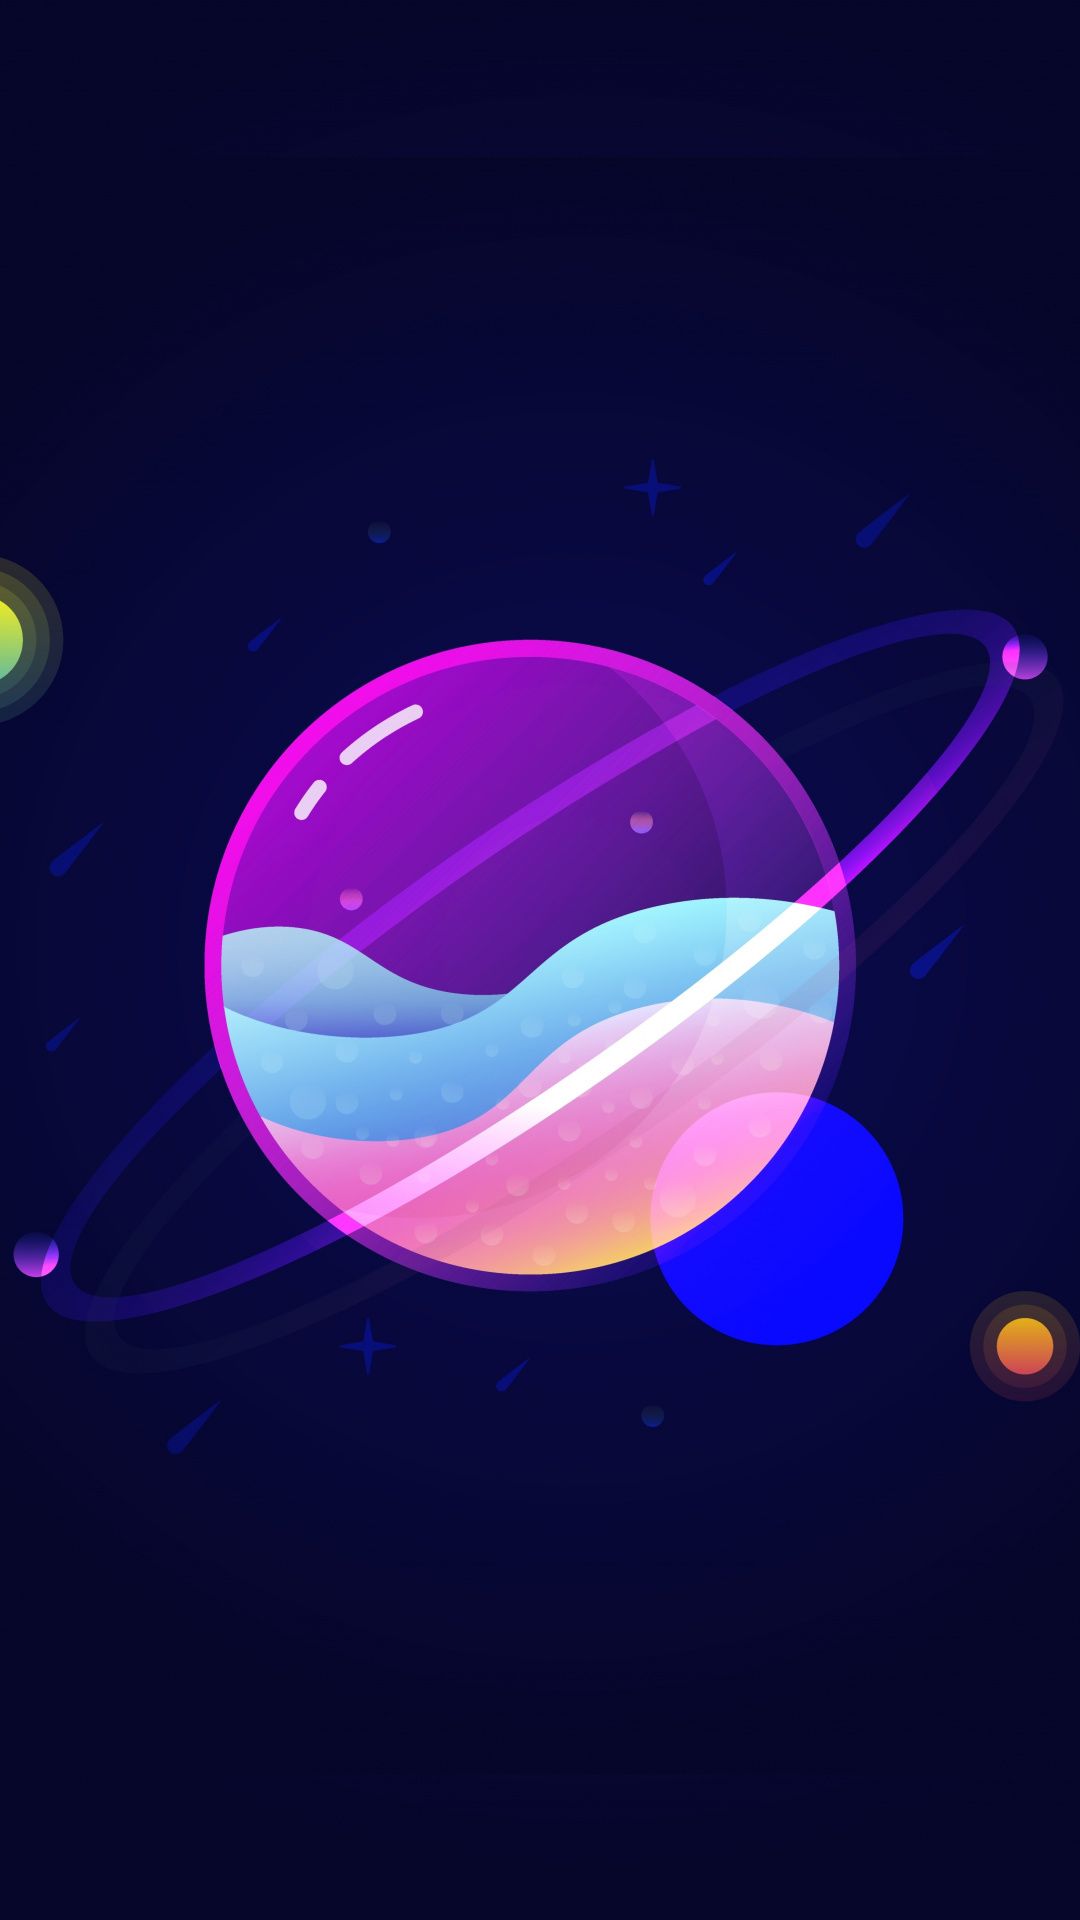 Colorful planet with ring on a dark blue background - Planet